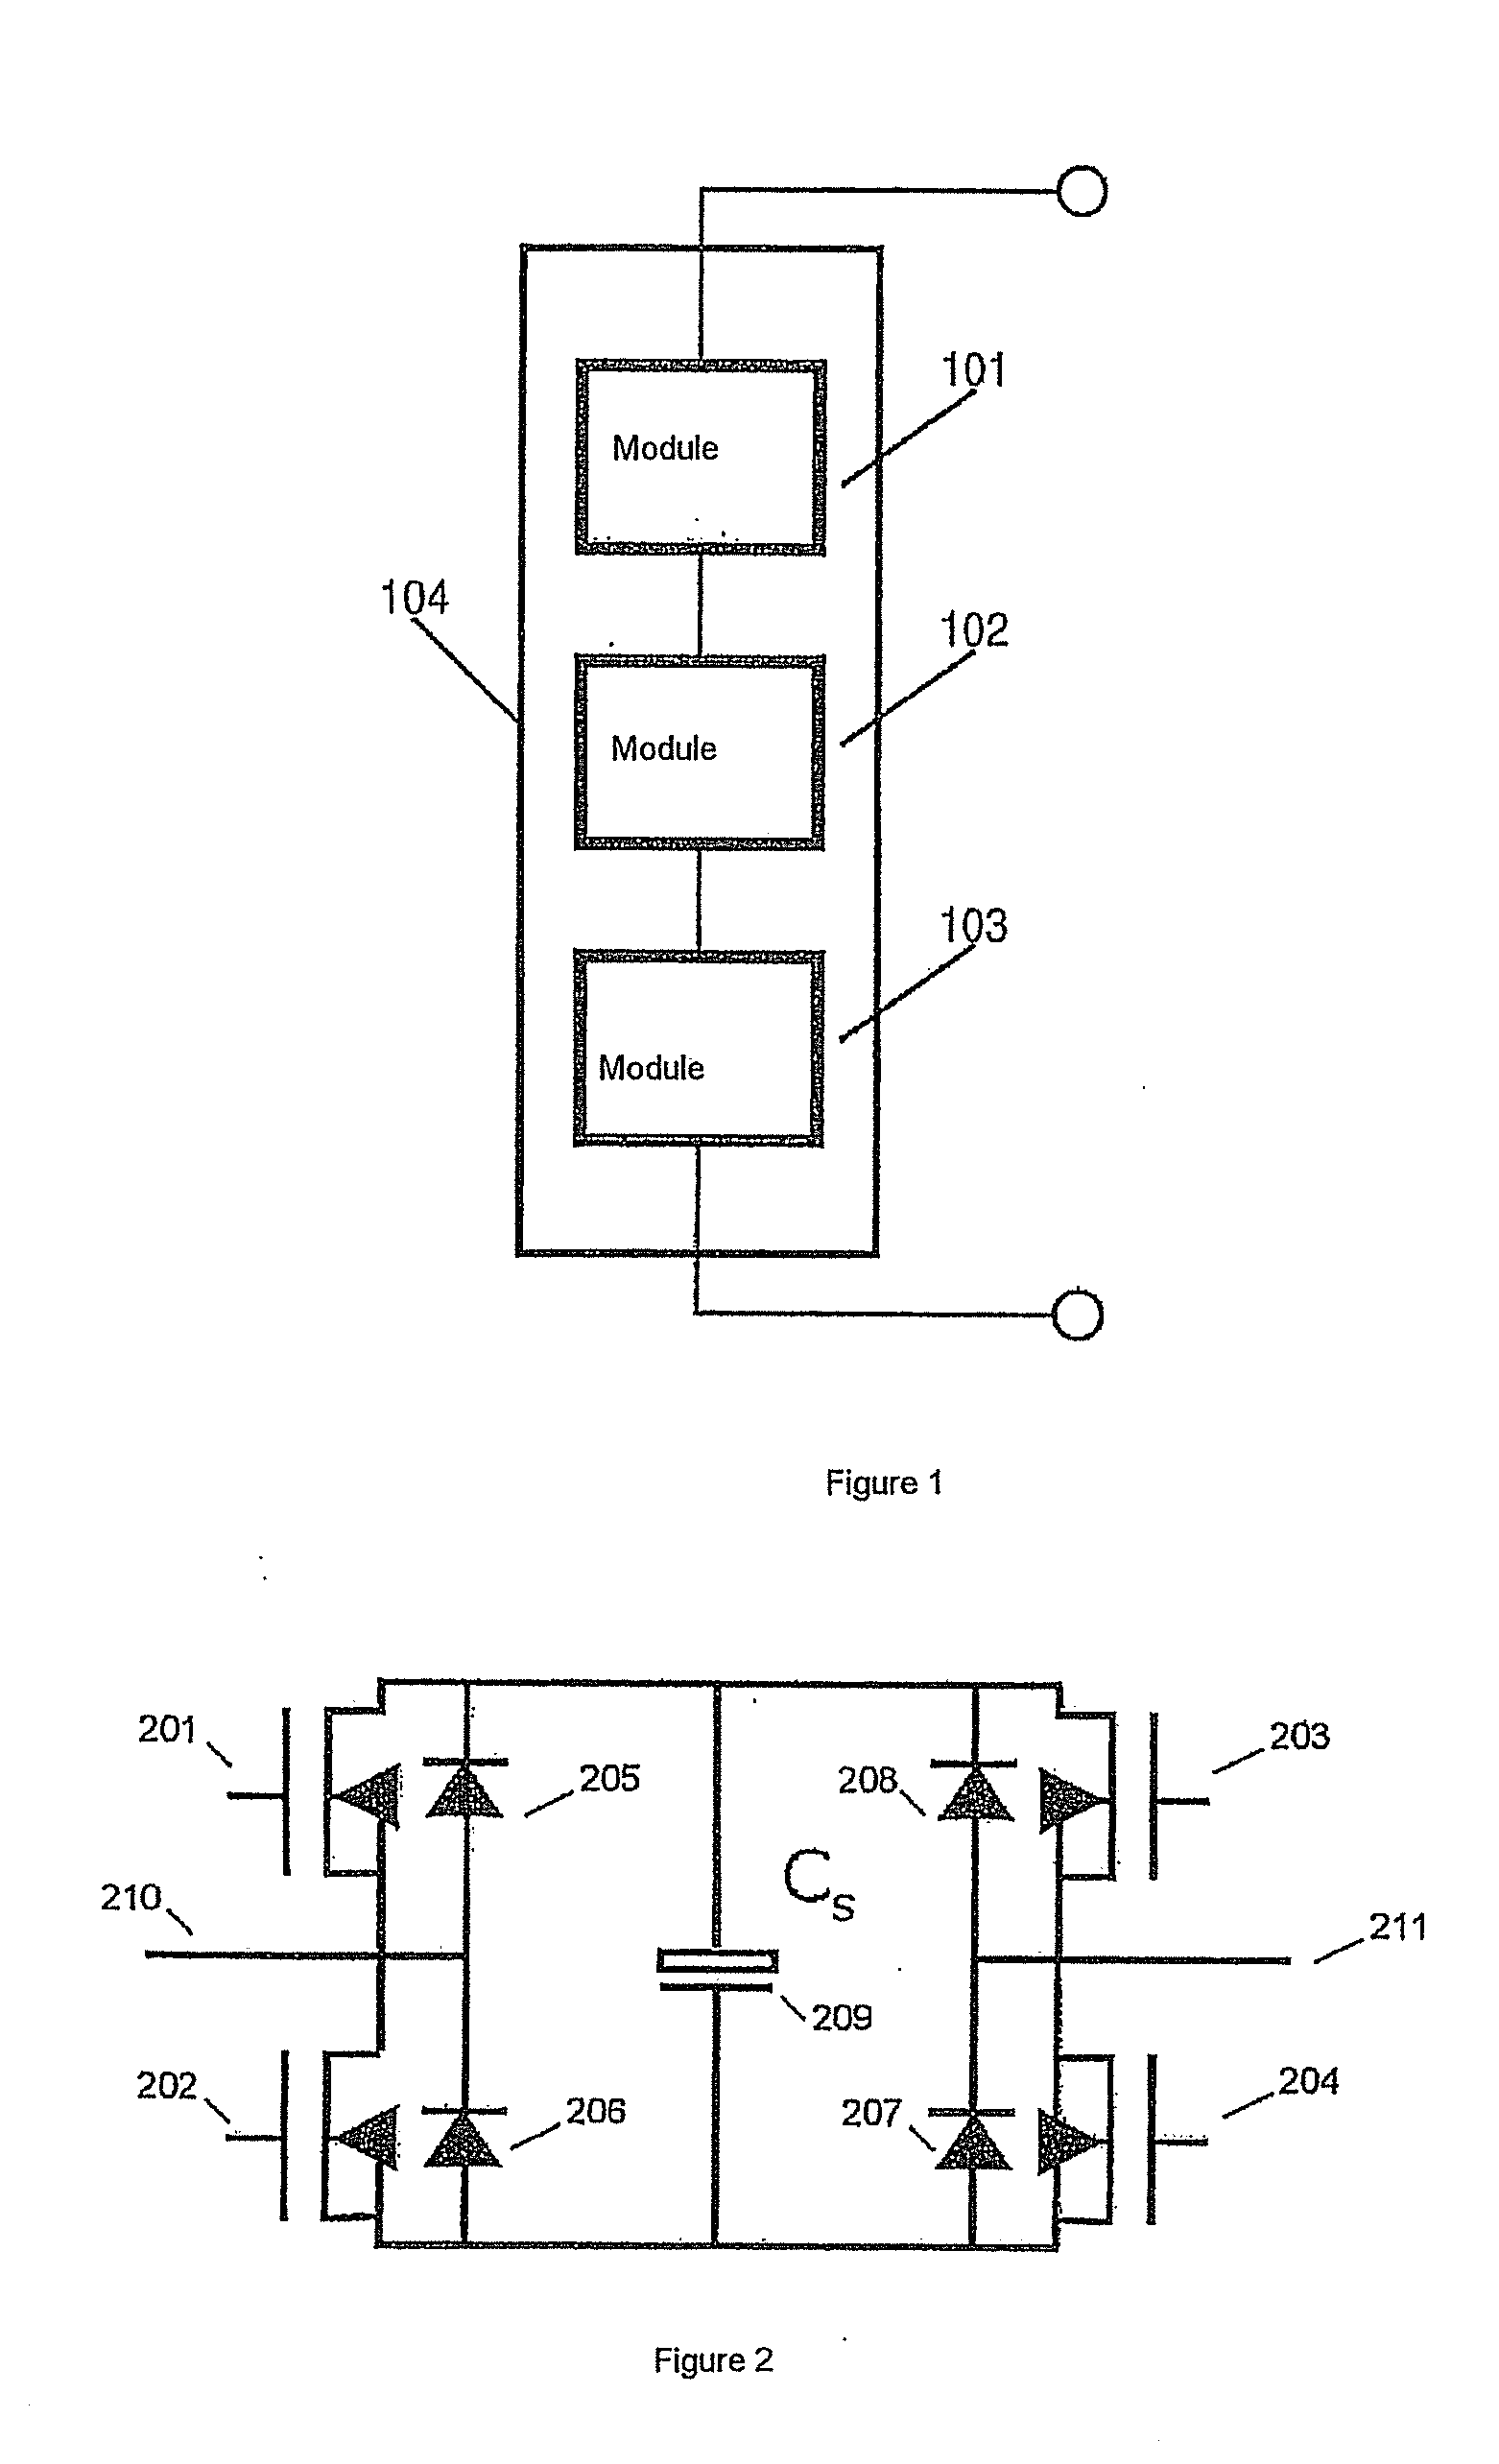 Novel multi-level converter topology with the possibility of dynamically connecting individual modules in series and in parallel